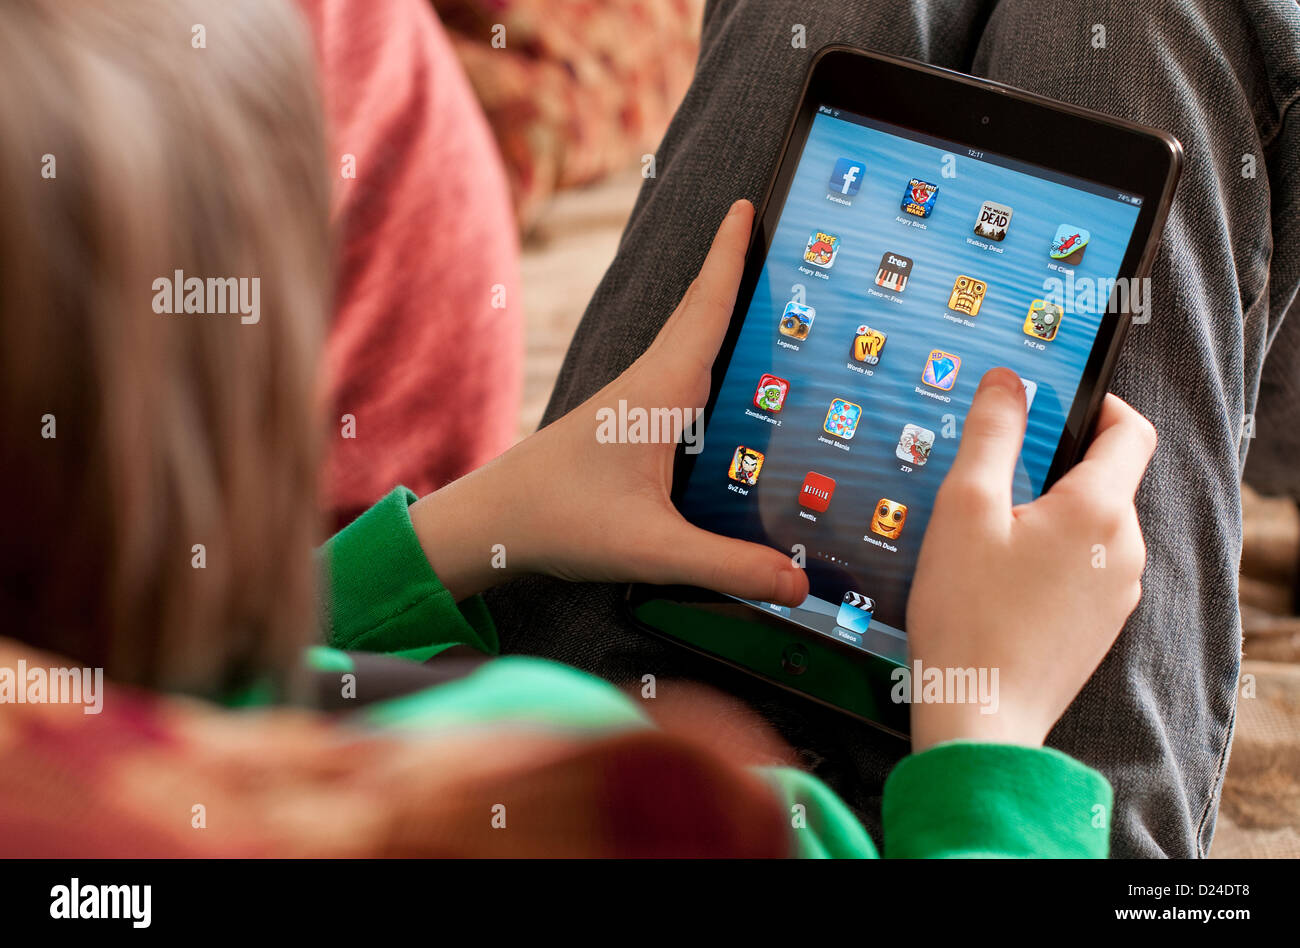 young male boy using ipad mini tablet computer Stock Photo